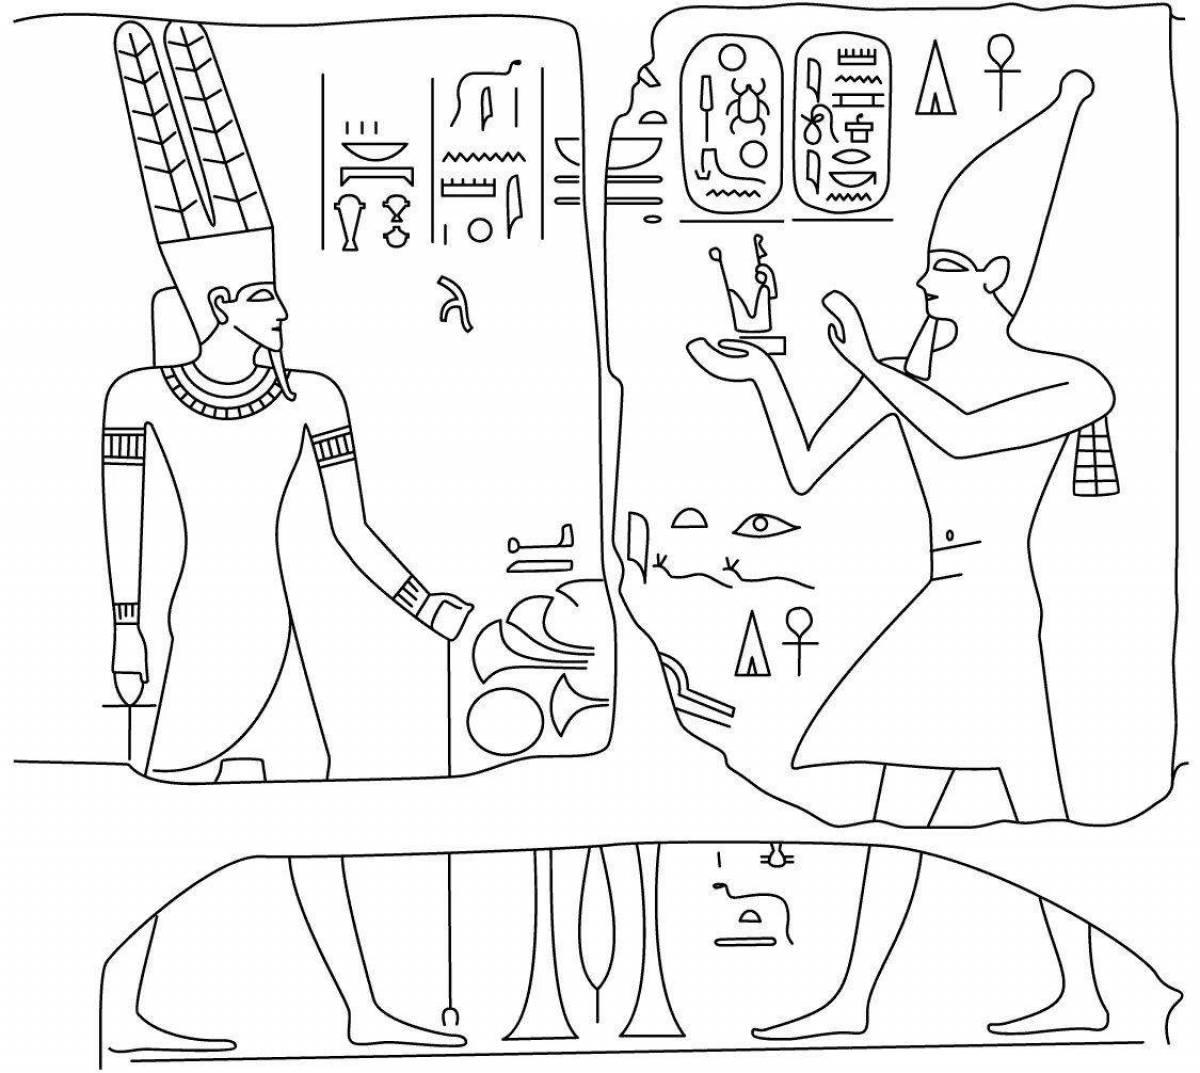 Delightful ancient egypt coloring book for kids